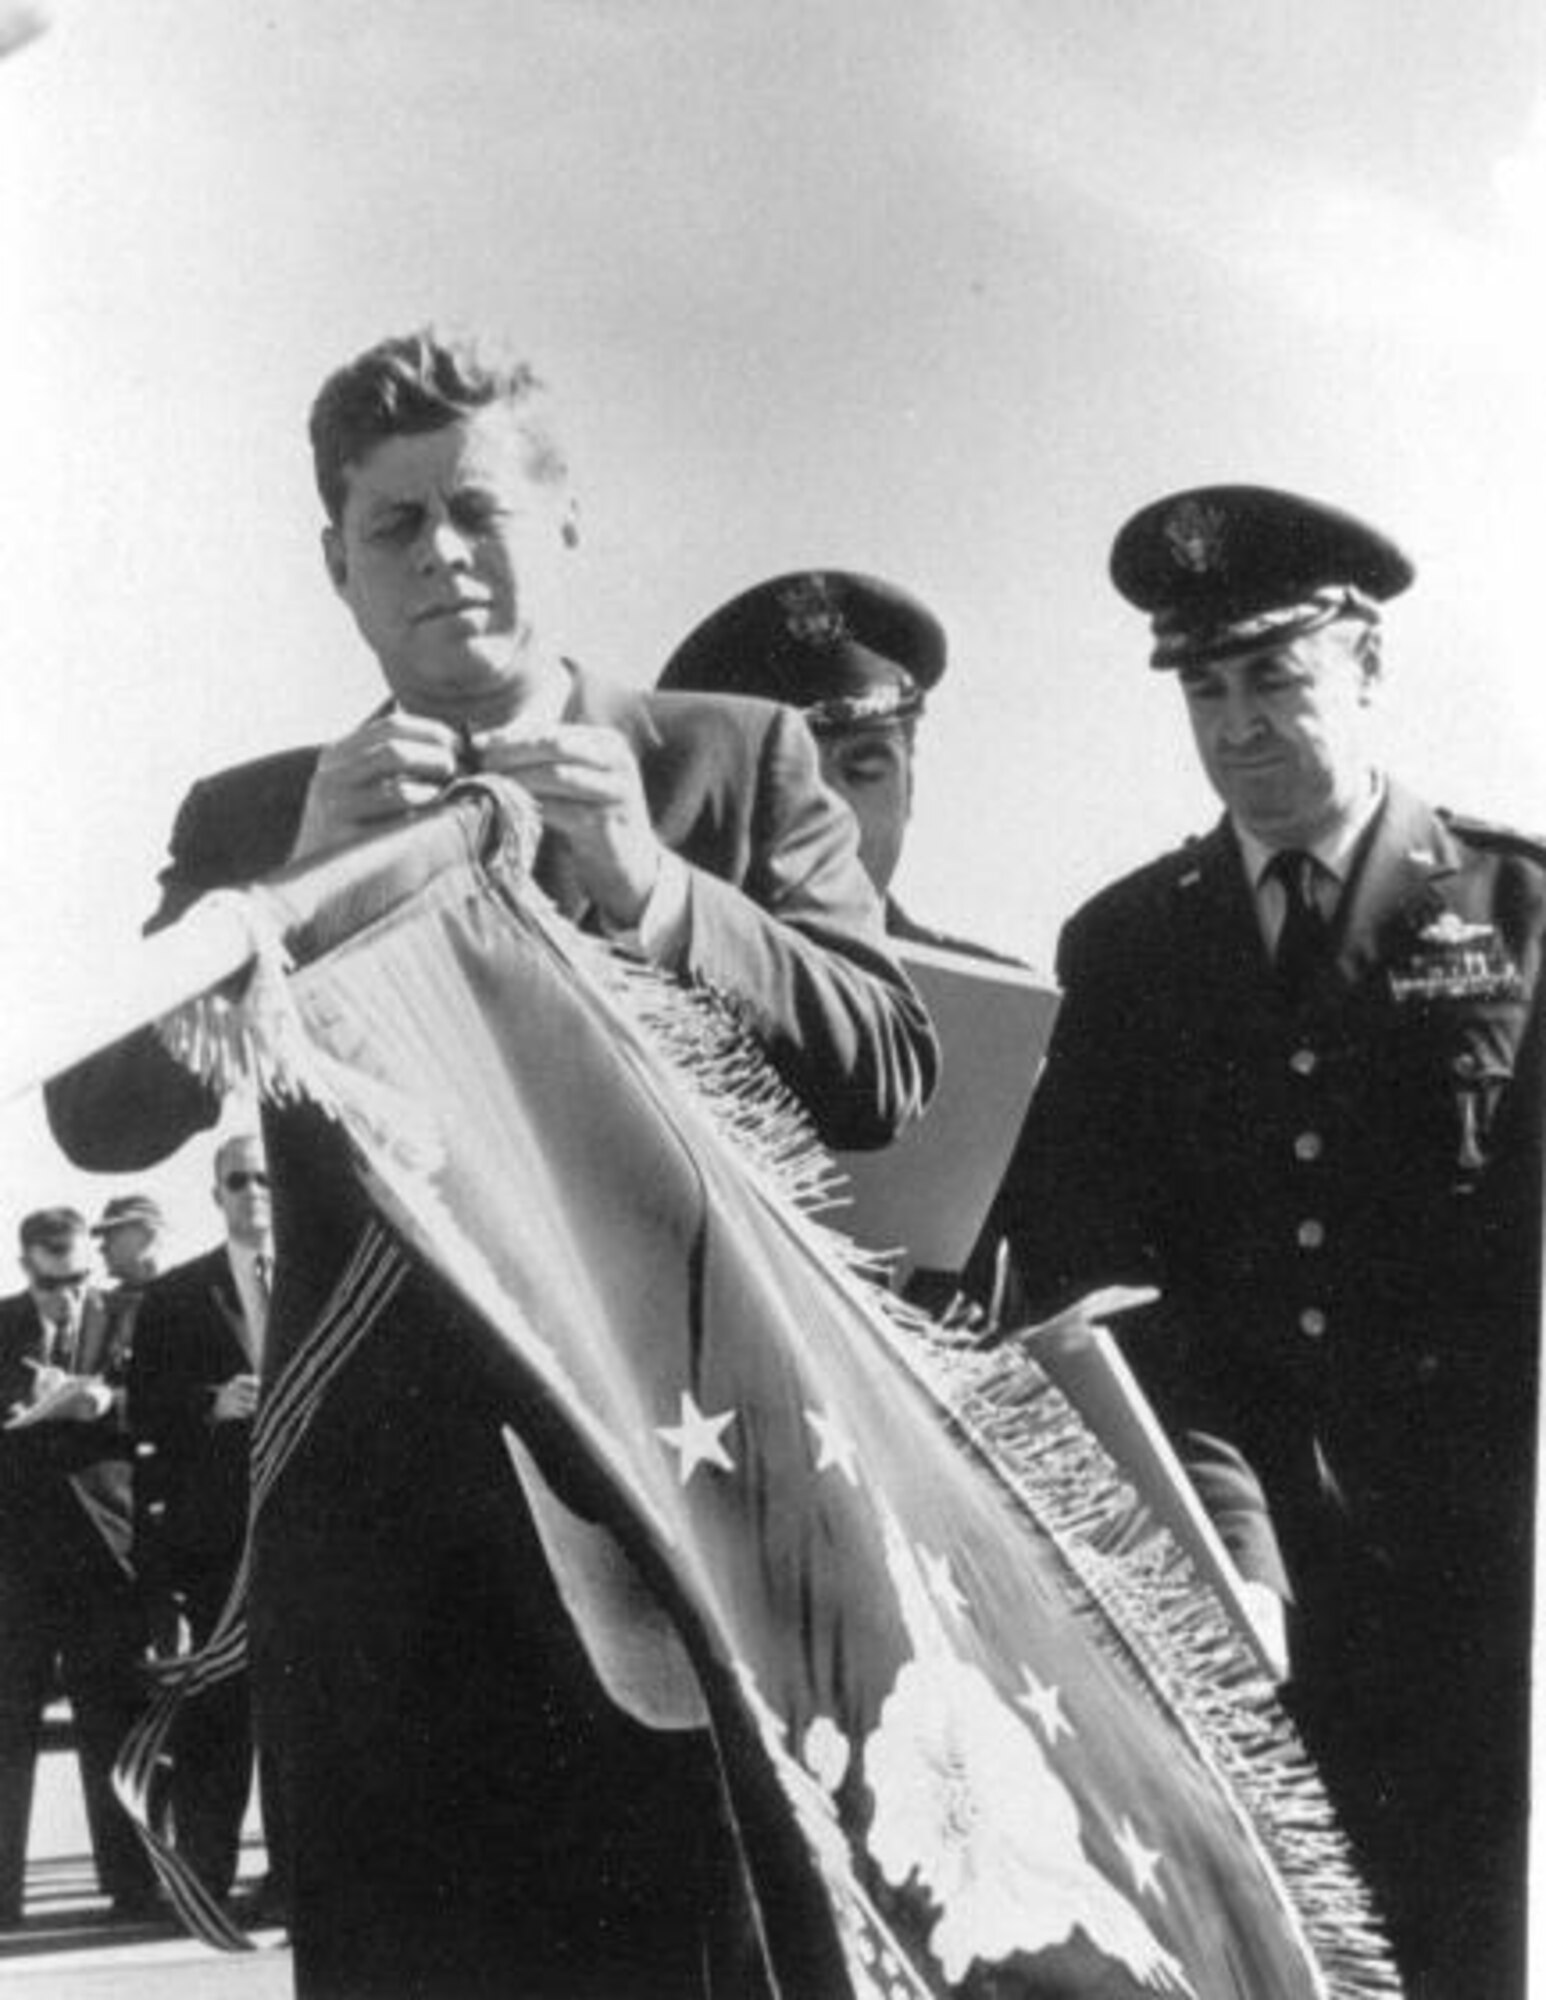 President John F. Kennedy presented the 4080th Strategic Wing from Laughlin Air Force Base, Texas, with an Air Force Outstanding Unit Award streamer for all services rendered from September 2, 1959 to November 24, 1962. That period included the reconnaissance missions the 4080th flew during the Cuban Missile Crisis. Ceremonies were held at Homestead AFB, Florida. (Courtesy Photo)